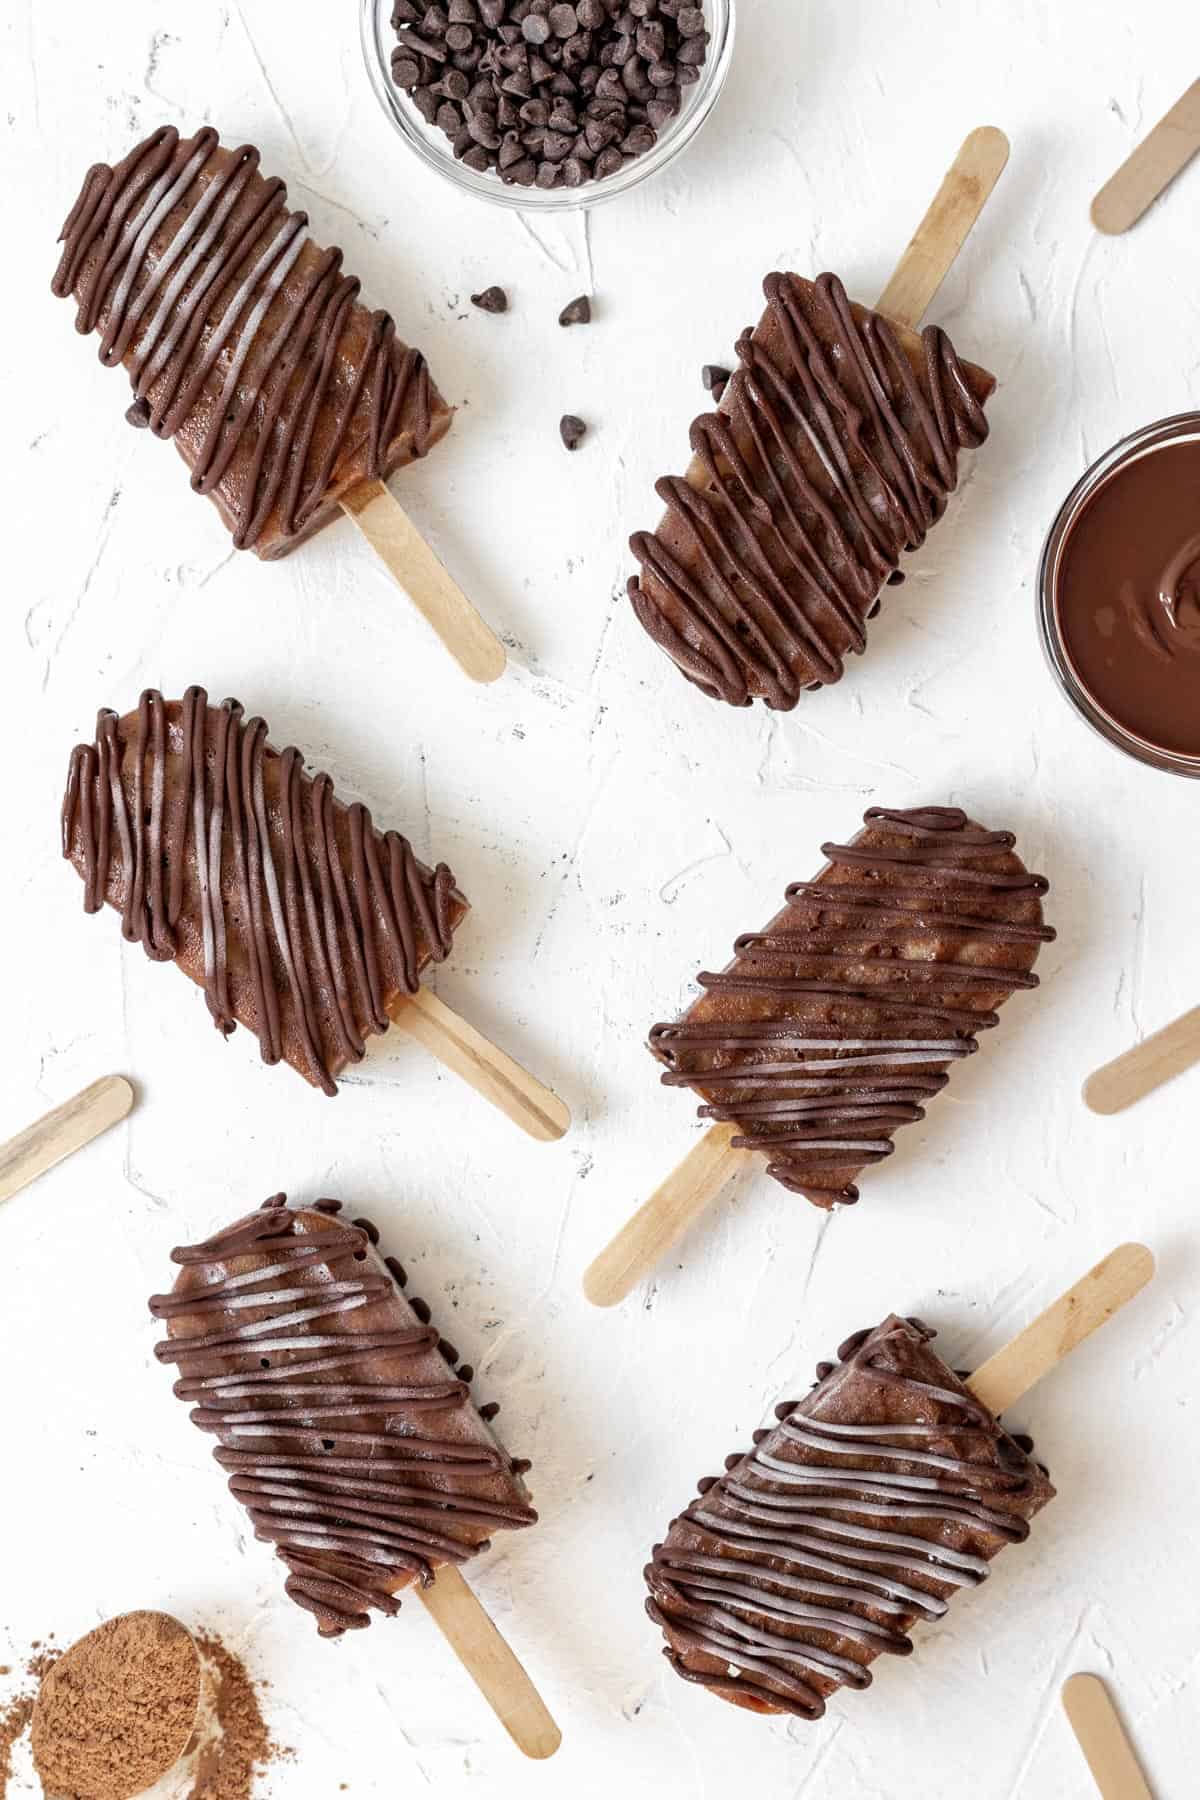 Creamy banana fudge chocolate popsicles spread out on a white background with melted chocolate and chocolate chops around them.